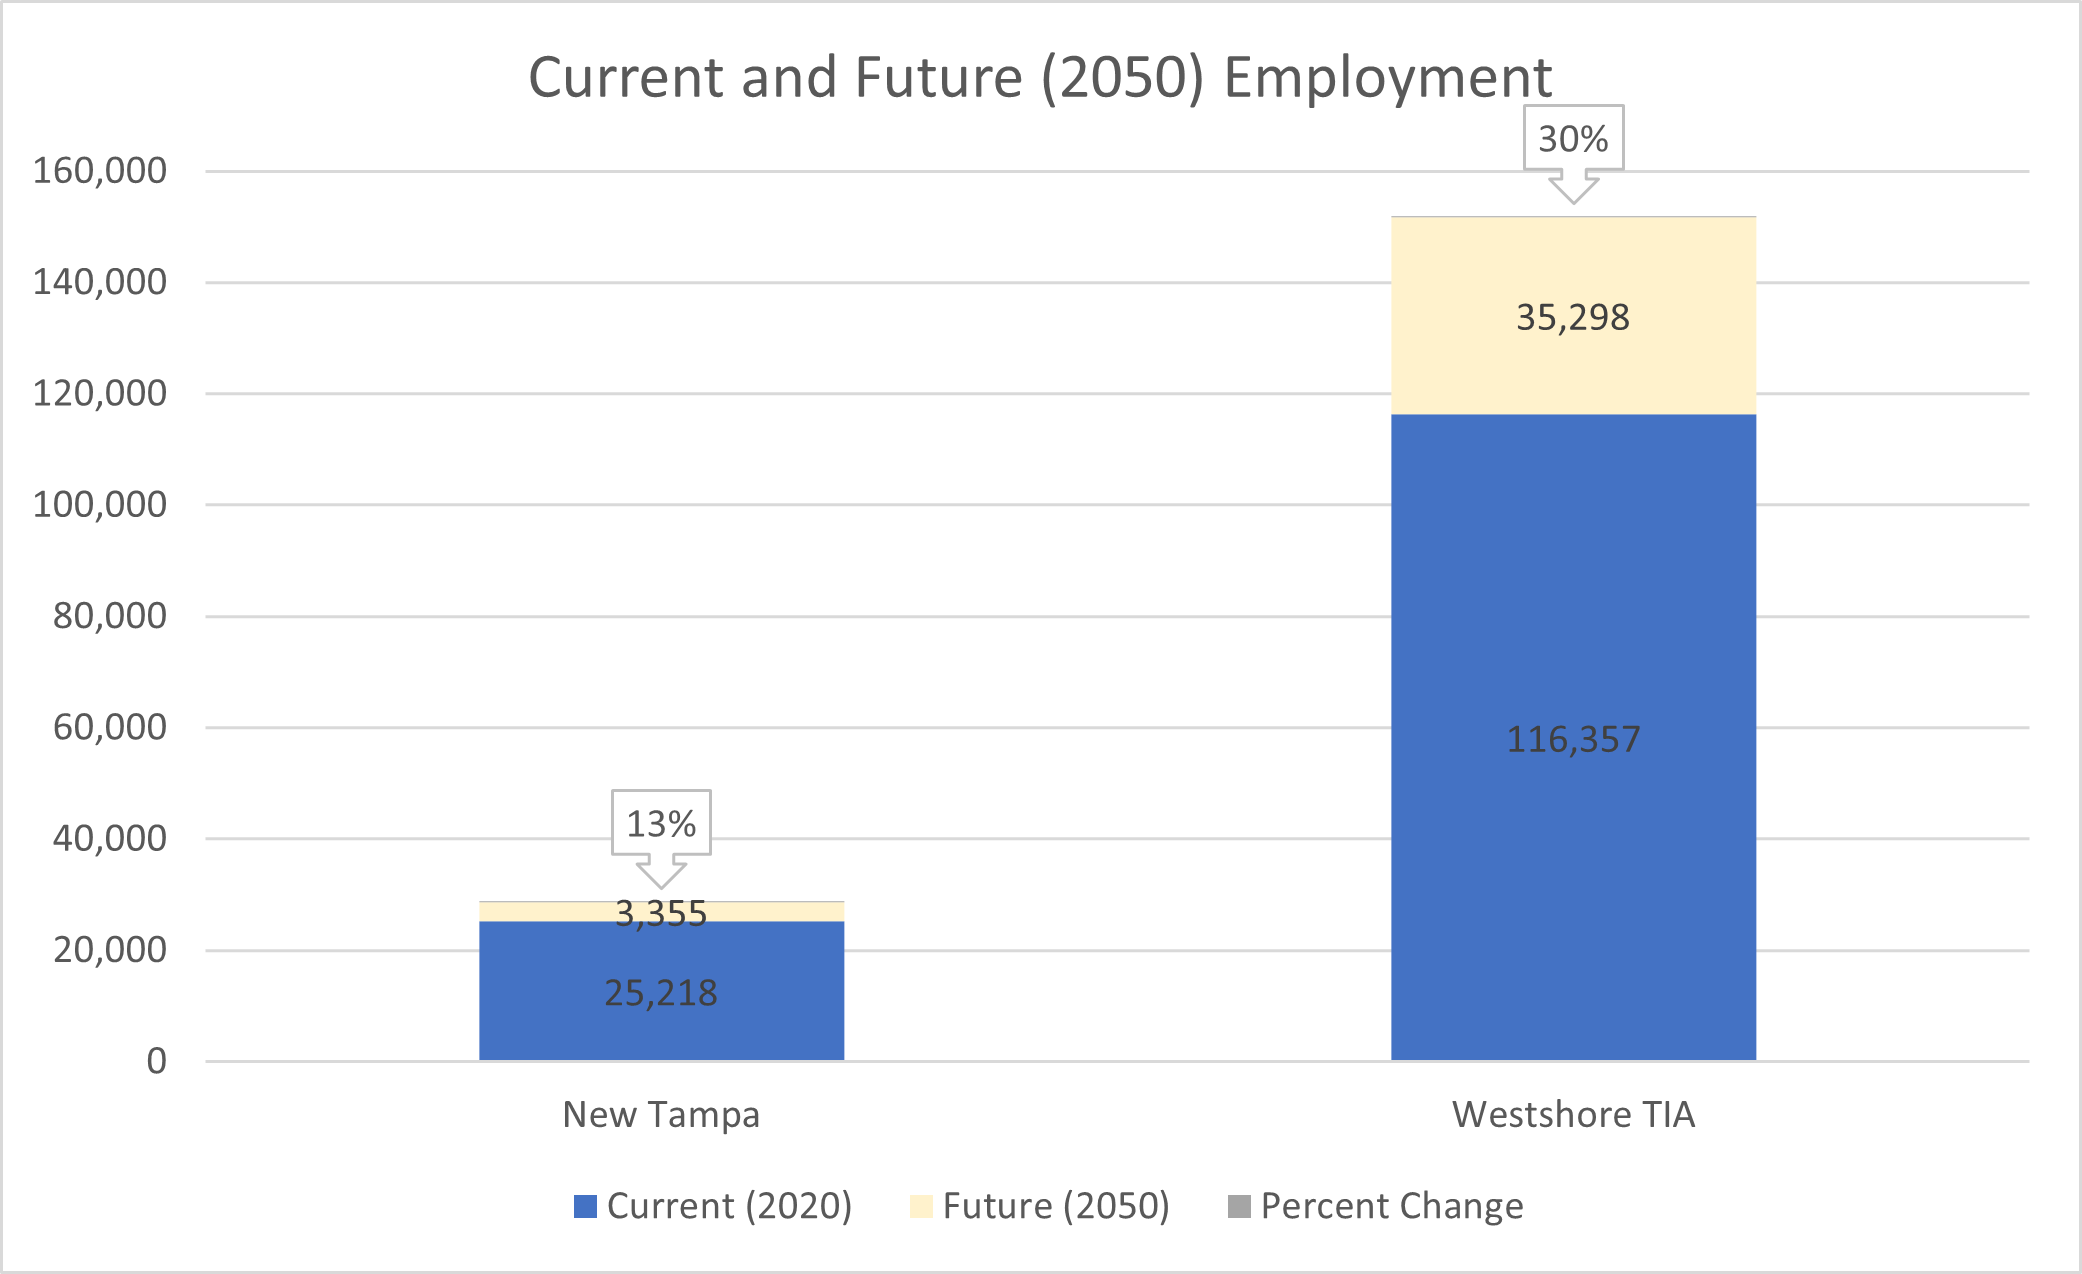 This bar chart shows current and future population for two of five Tampa Planning Districts: New Tampa and Westshore TIA. New Tampa is expected to attract 3,355 new jobs (13% higher than 2020). Westshore TIA is expected to attract 35,298 new residents (30% higher than 2020).